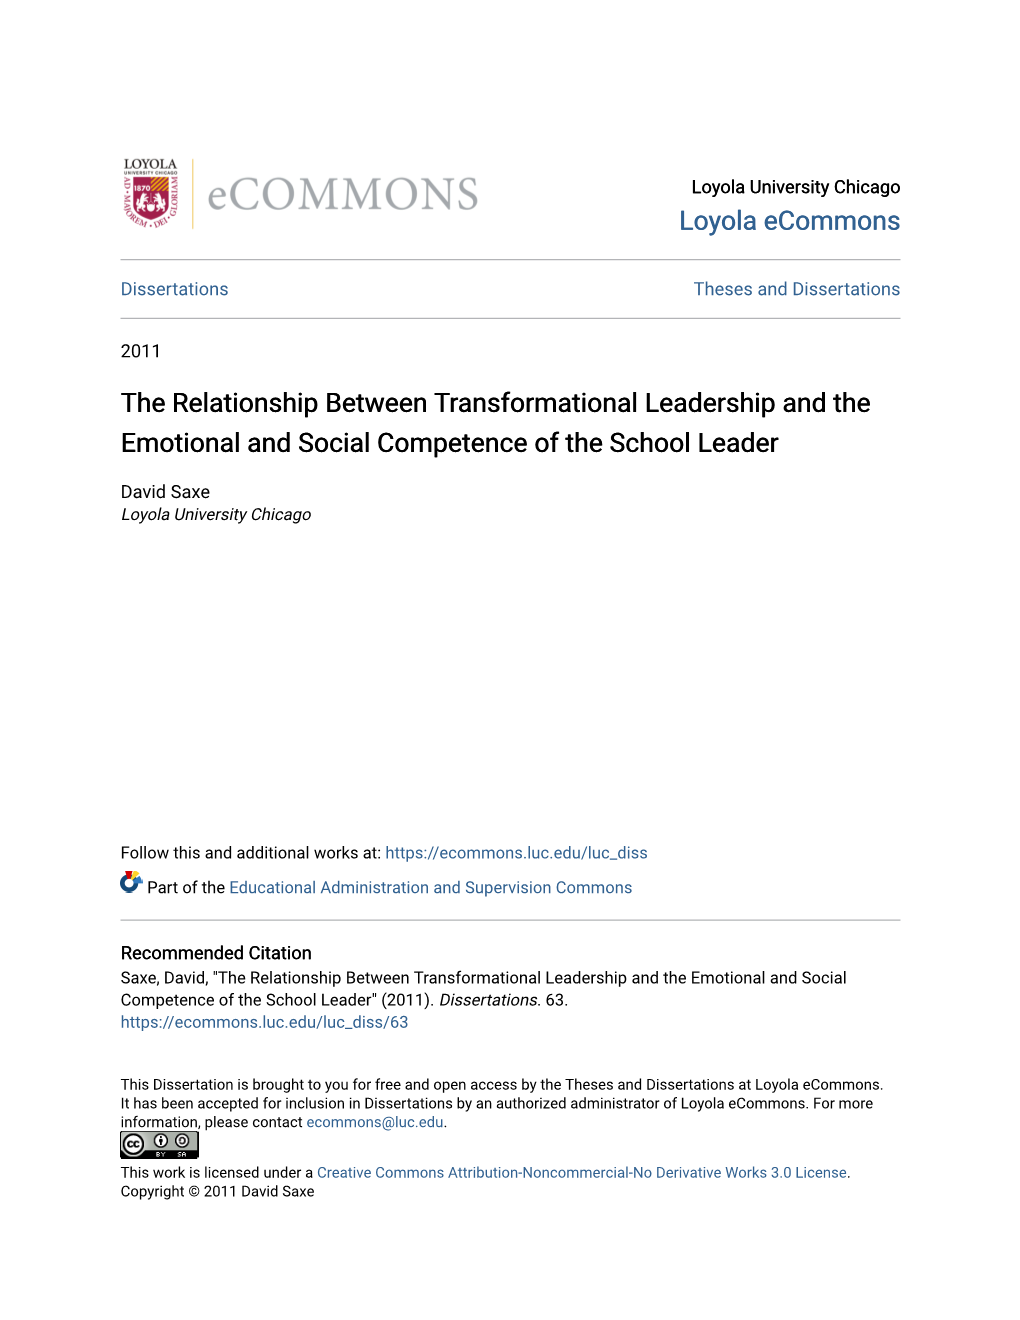 The Relationship Between Transformational Leadership and the Emotional and Social Competence of the School Leader